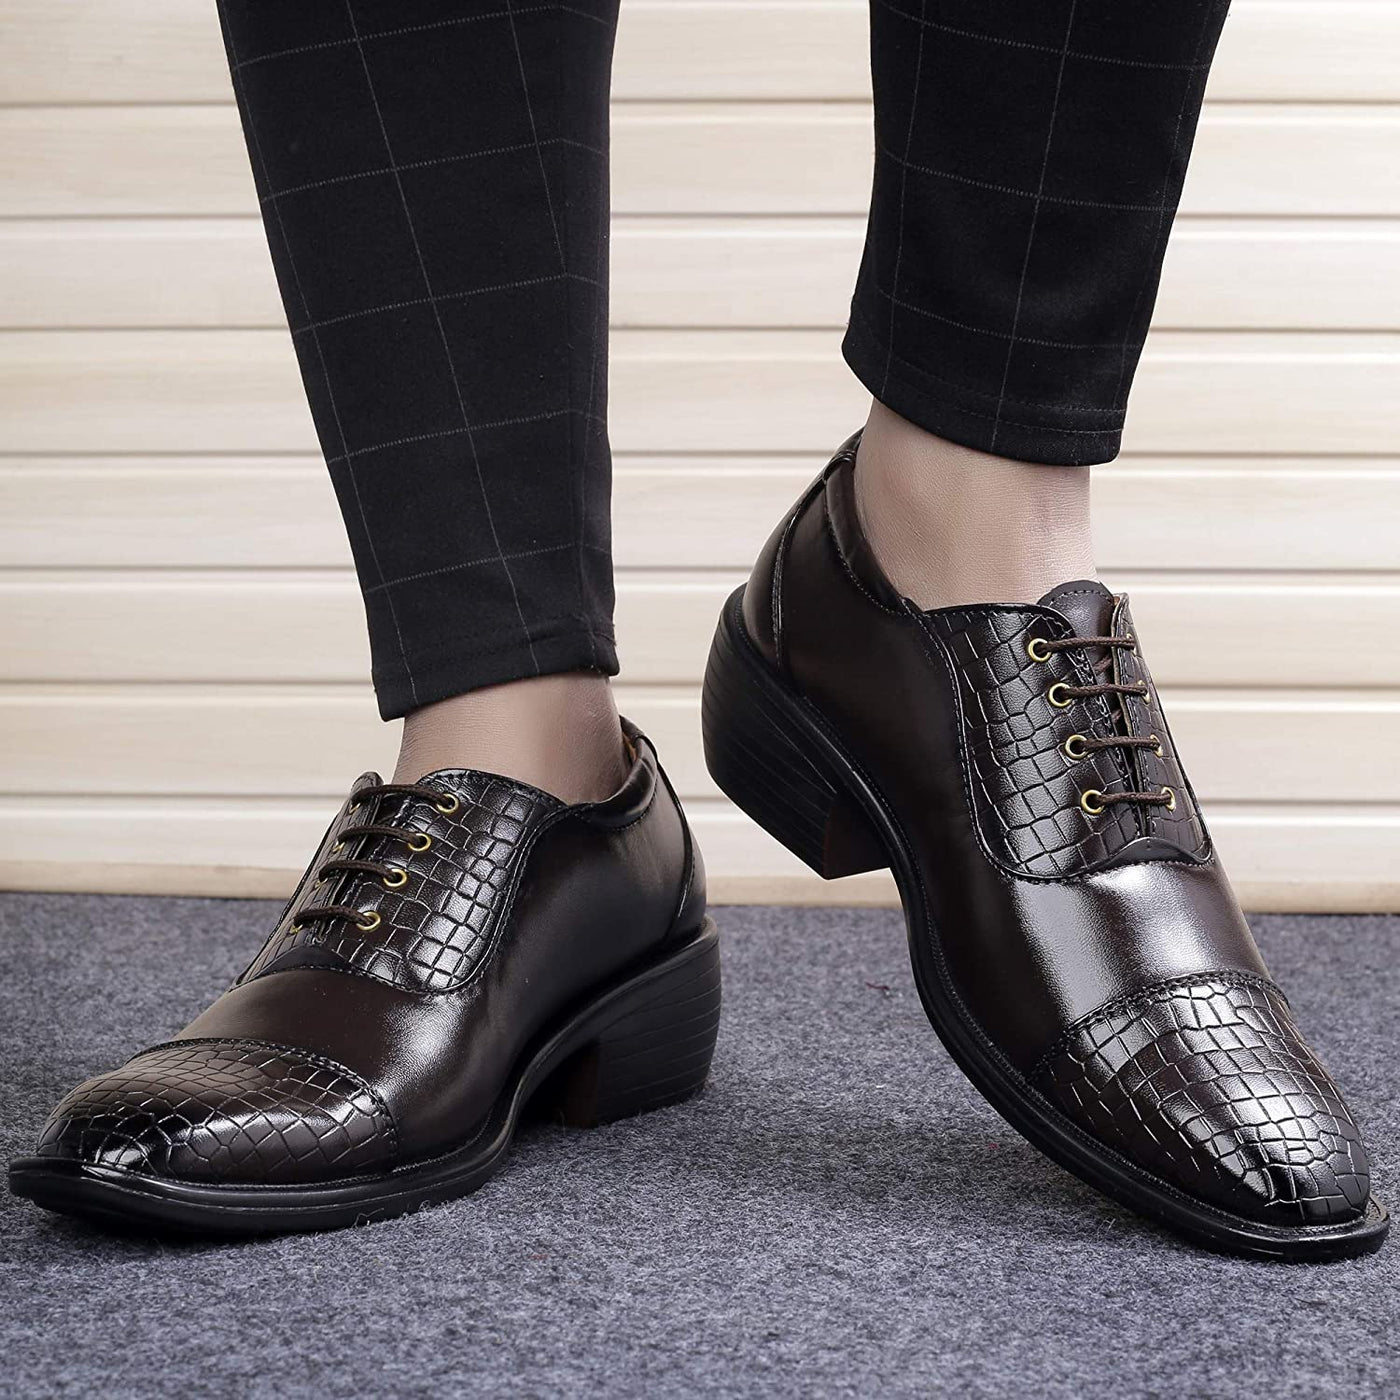 Stylish Brown Formal and Casual Wear Lace-Up Shoes With Height Increasing Heel-Unique and Classy